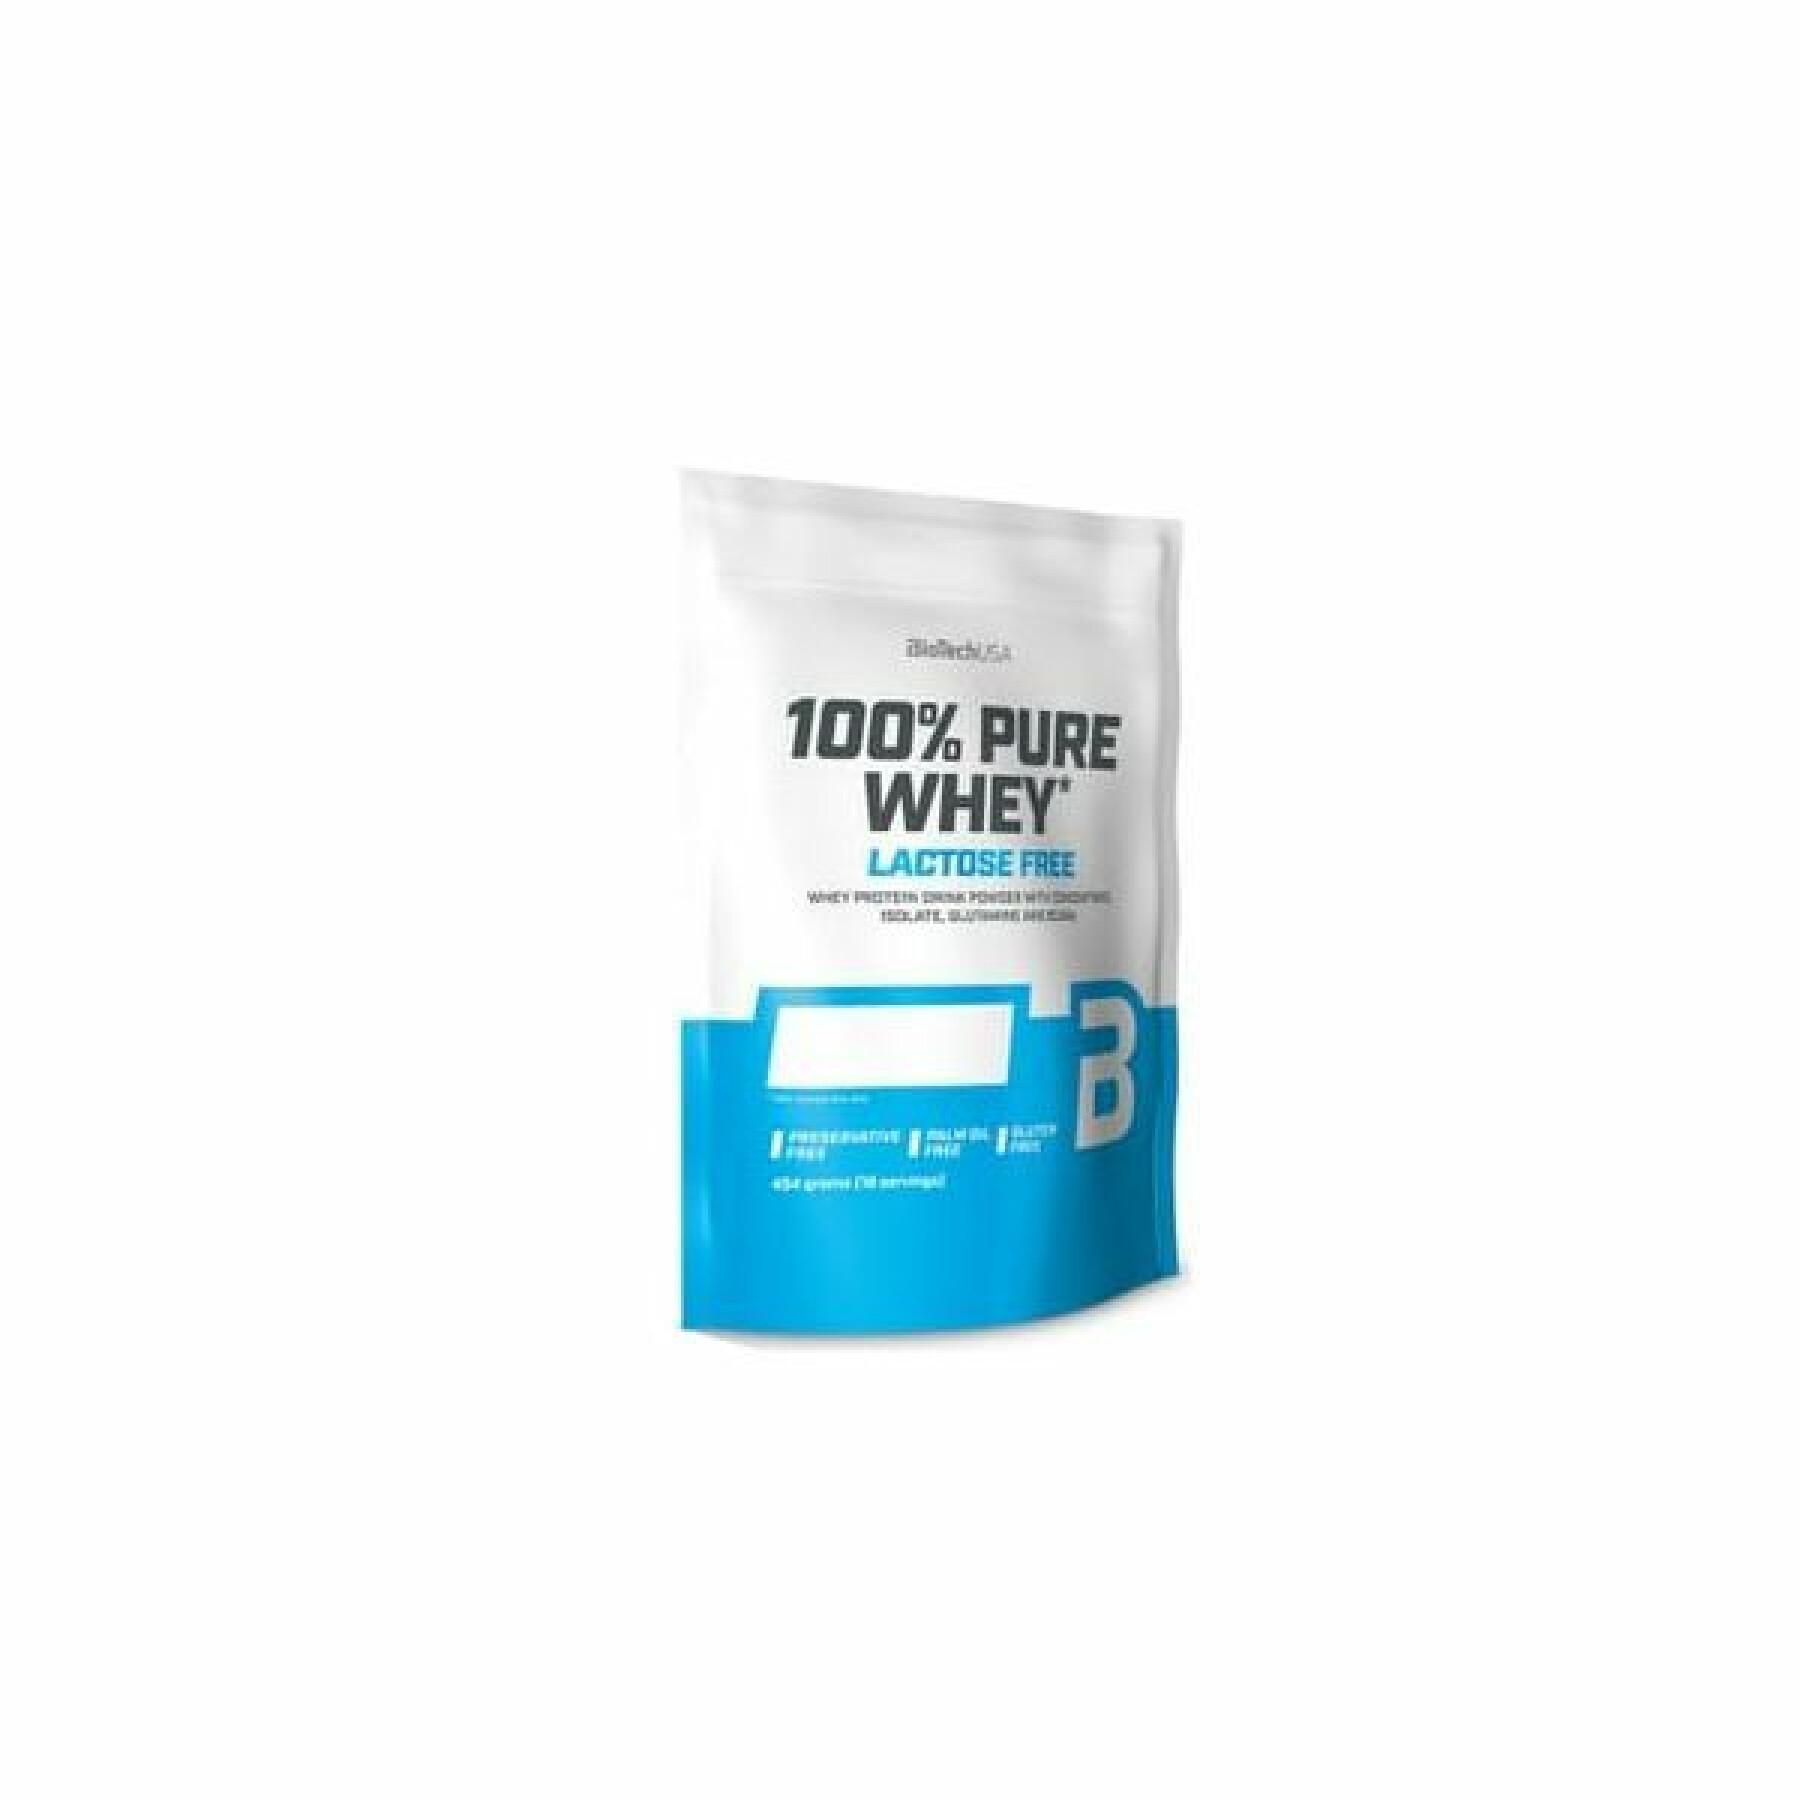 Förpackning med 10 proteinpåsar Biotech USA 100% pure whey lactose free - Chocolate - 454g